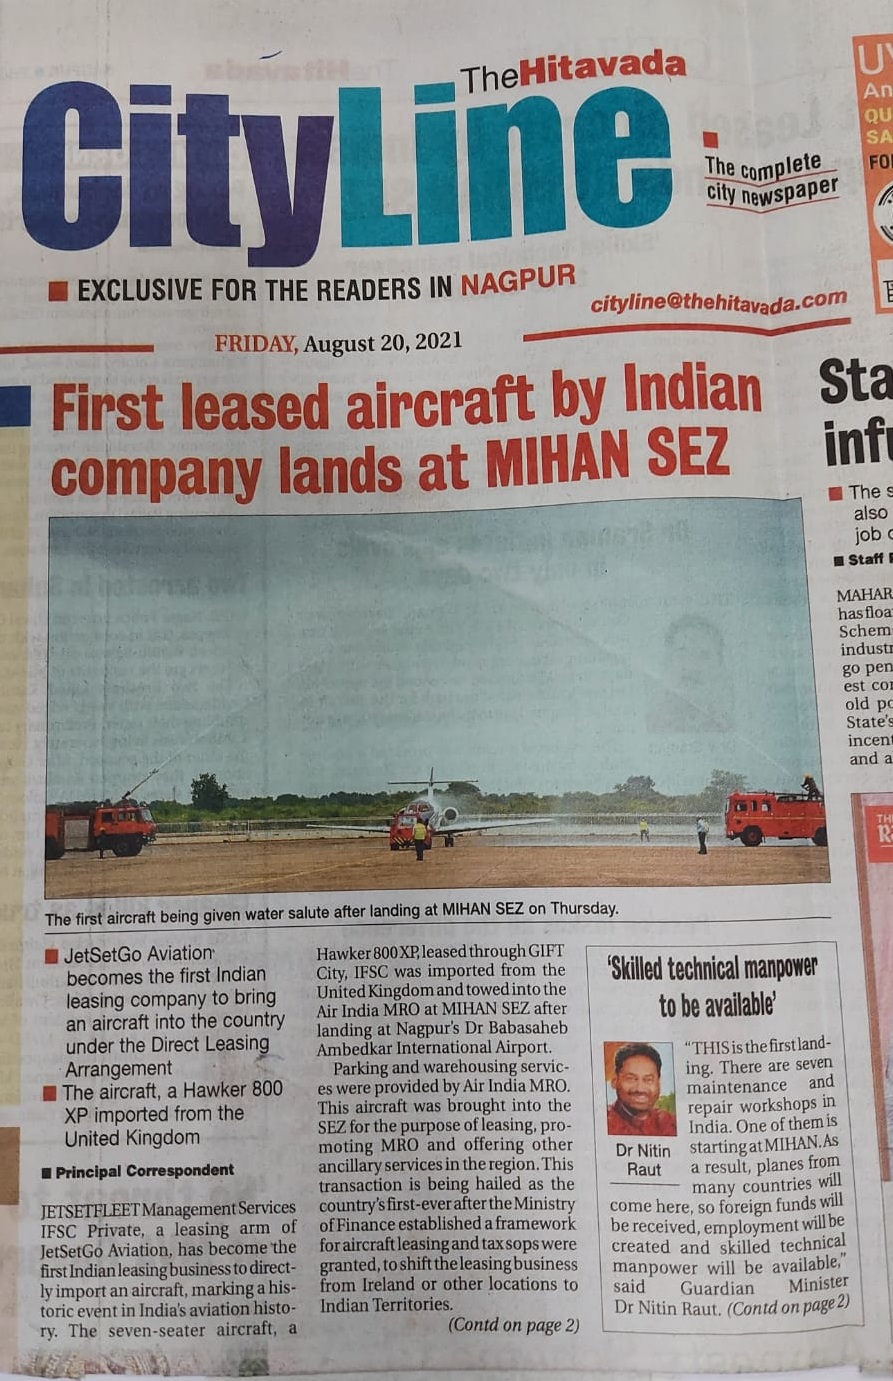 First leased aircraft by Indian company lands at MIHAN-SEZ